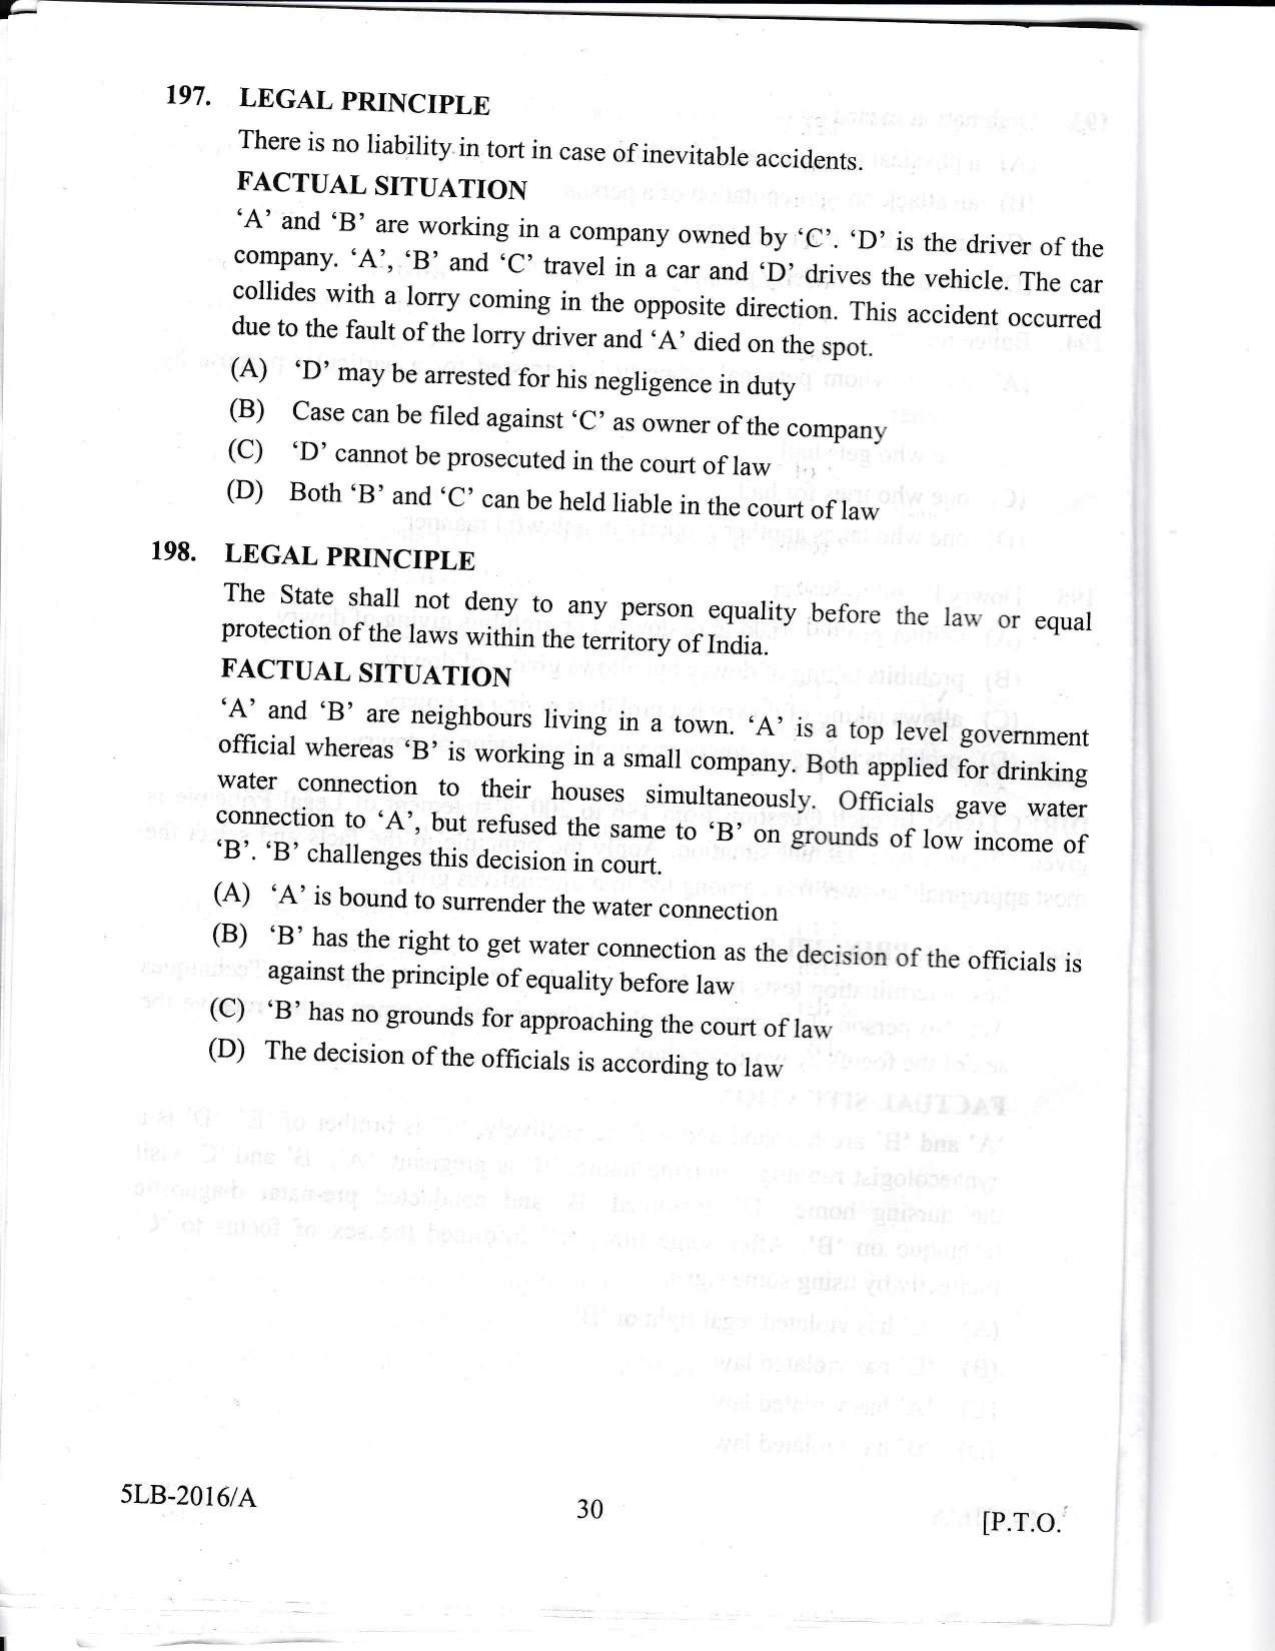 KLEE 5 Year LLB Exam 2016 Question Paper - Page 30